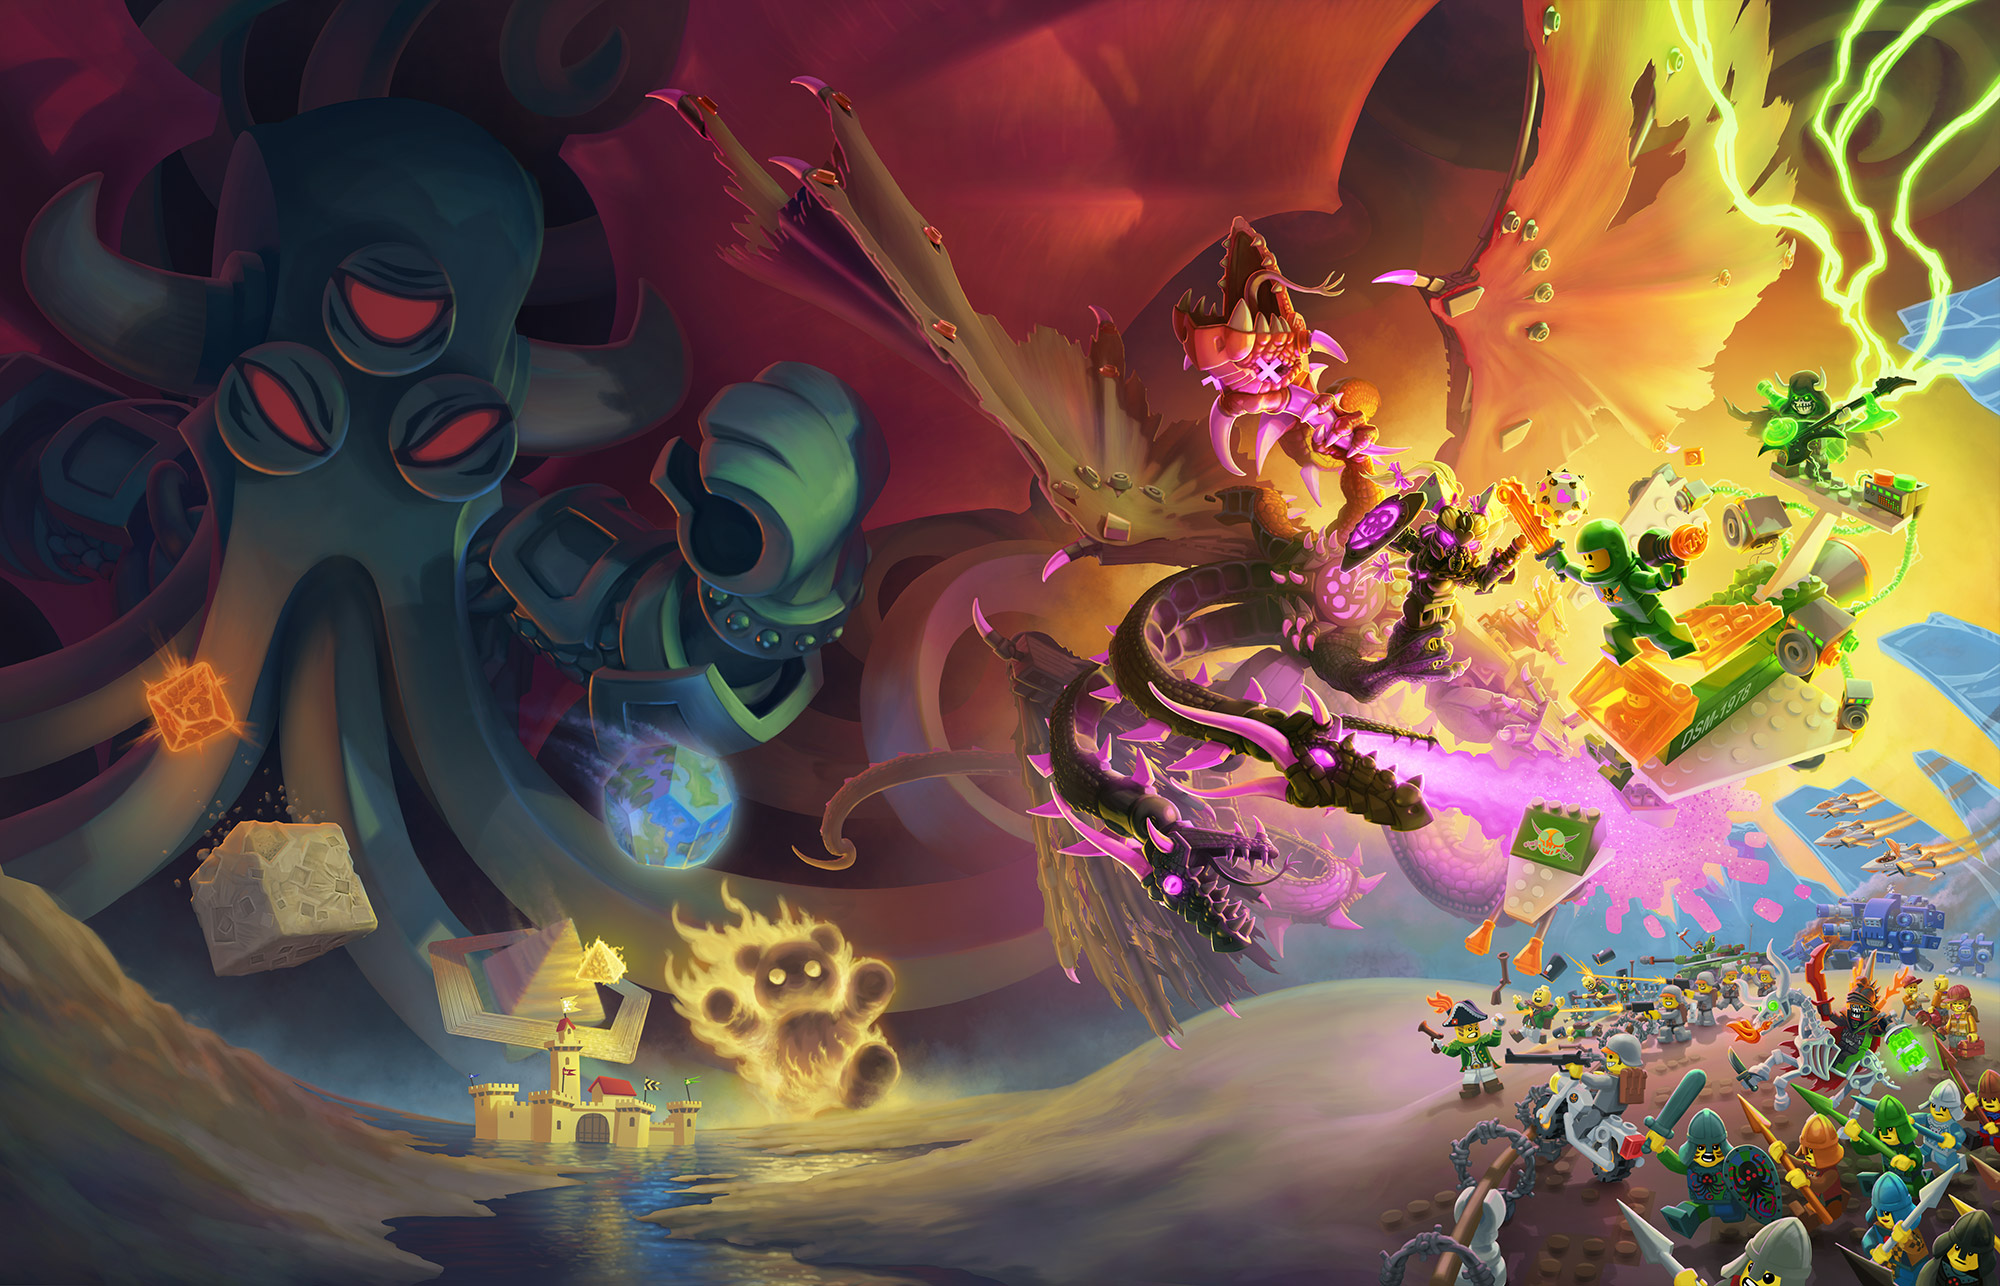 Key art for Brikwars’ definitive retail edition, showing tons of miniatures and toys come together in an epic, colorful battle with a Cthulu, a flaming teddy bear, an army of Lego figurines, and a flame spewing hydra.